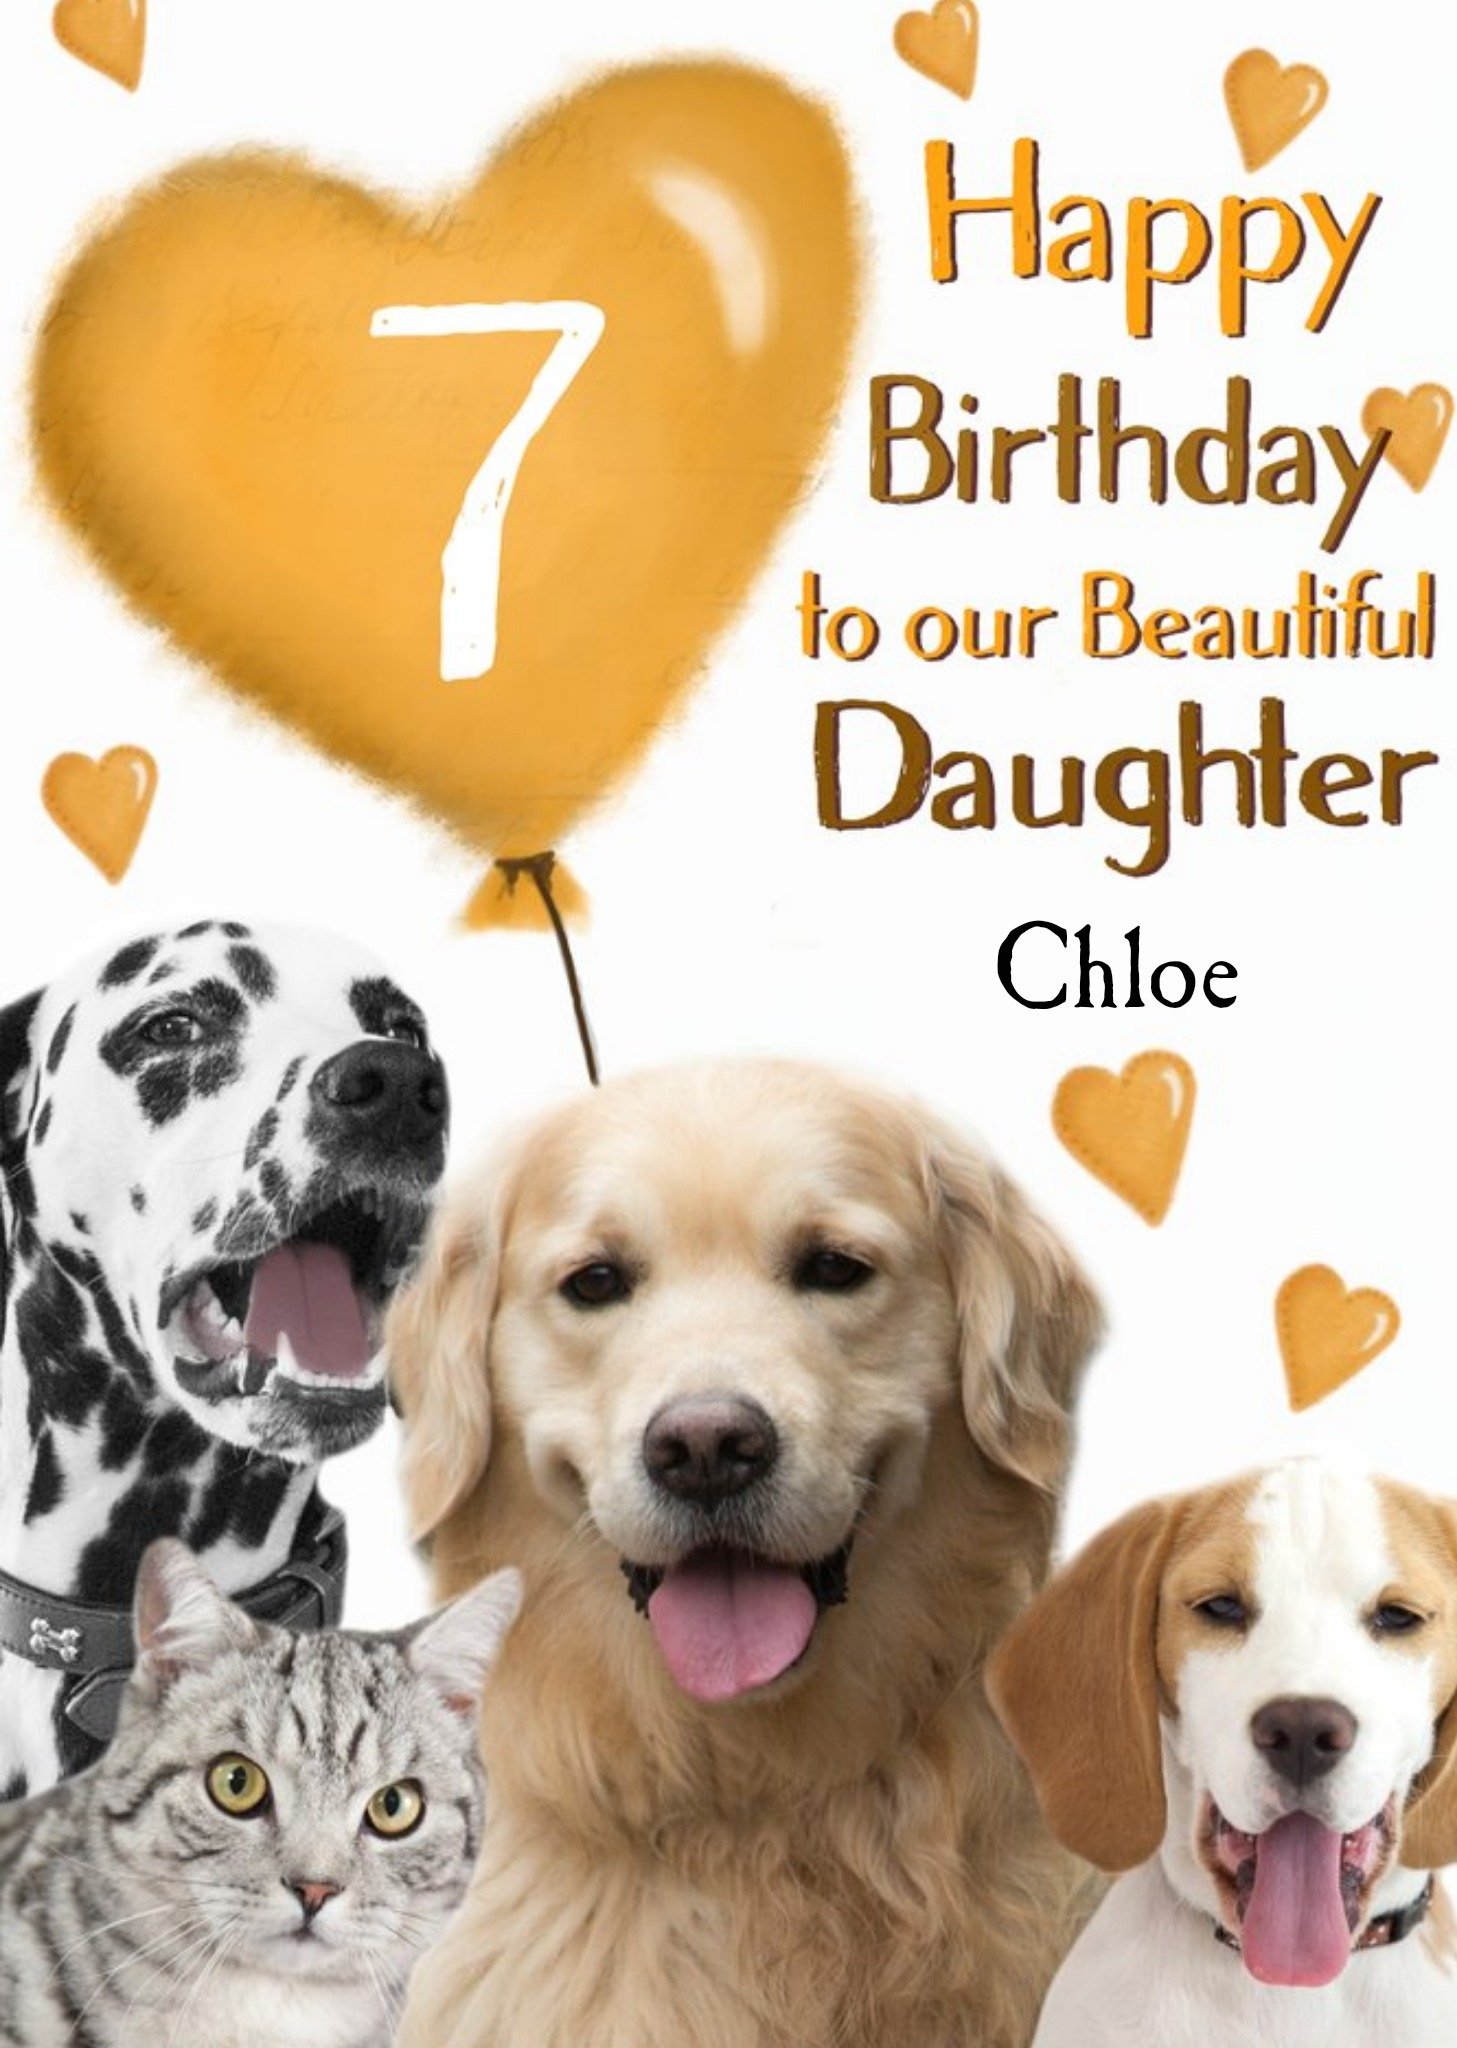 Moonpig Photo Of Dogs And Cats With Birthday Balloon Daughter 7th Birthday Card, Large